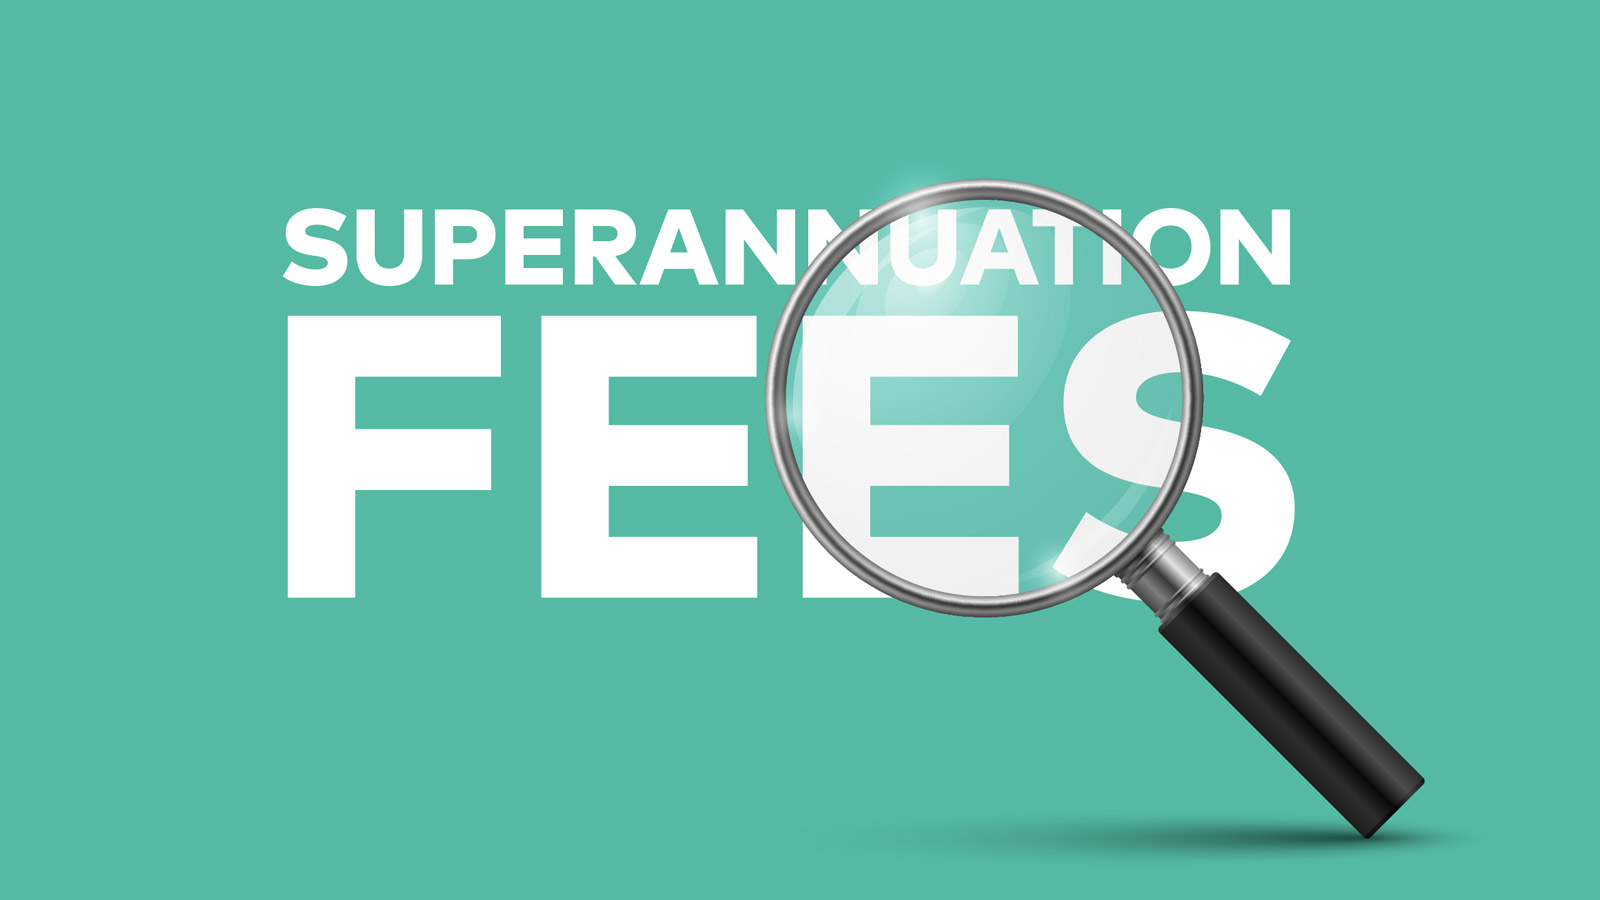 Why superannuation fund fees matter